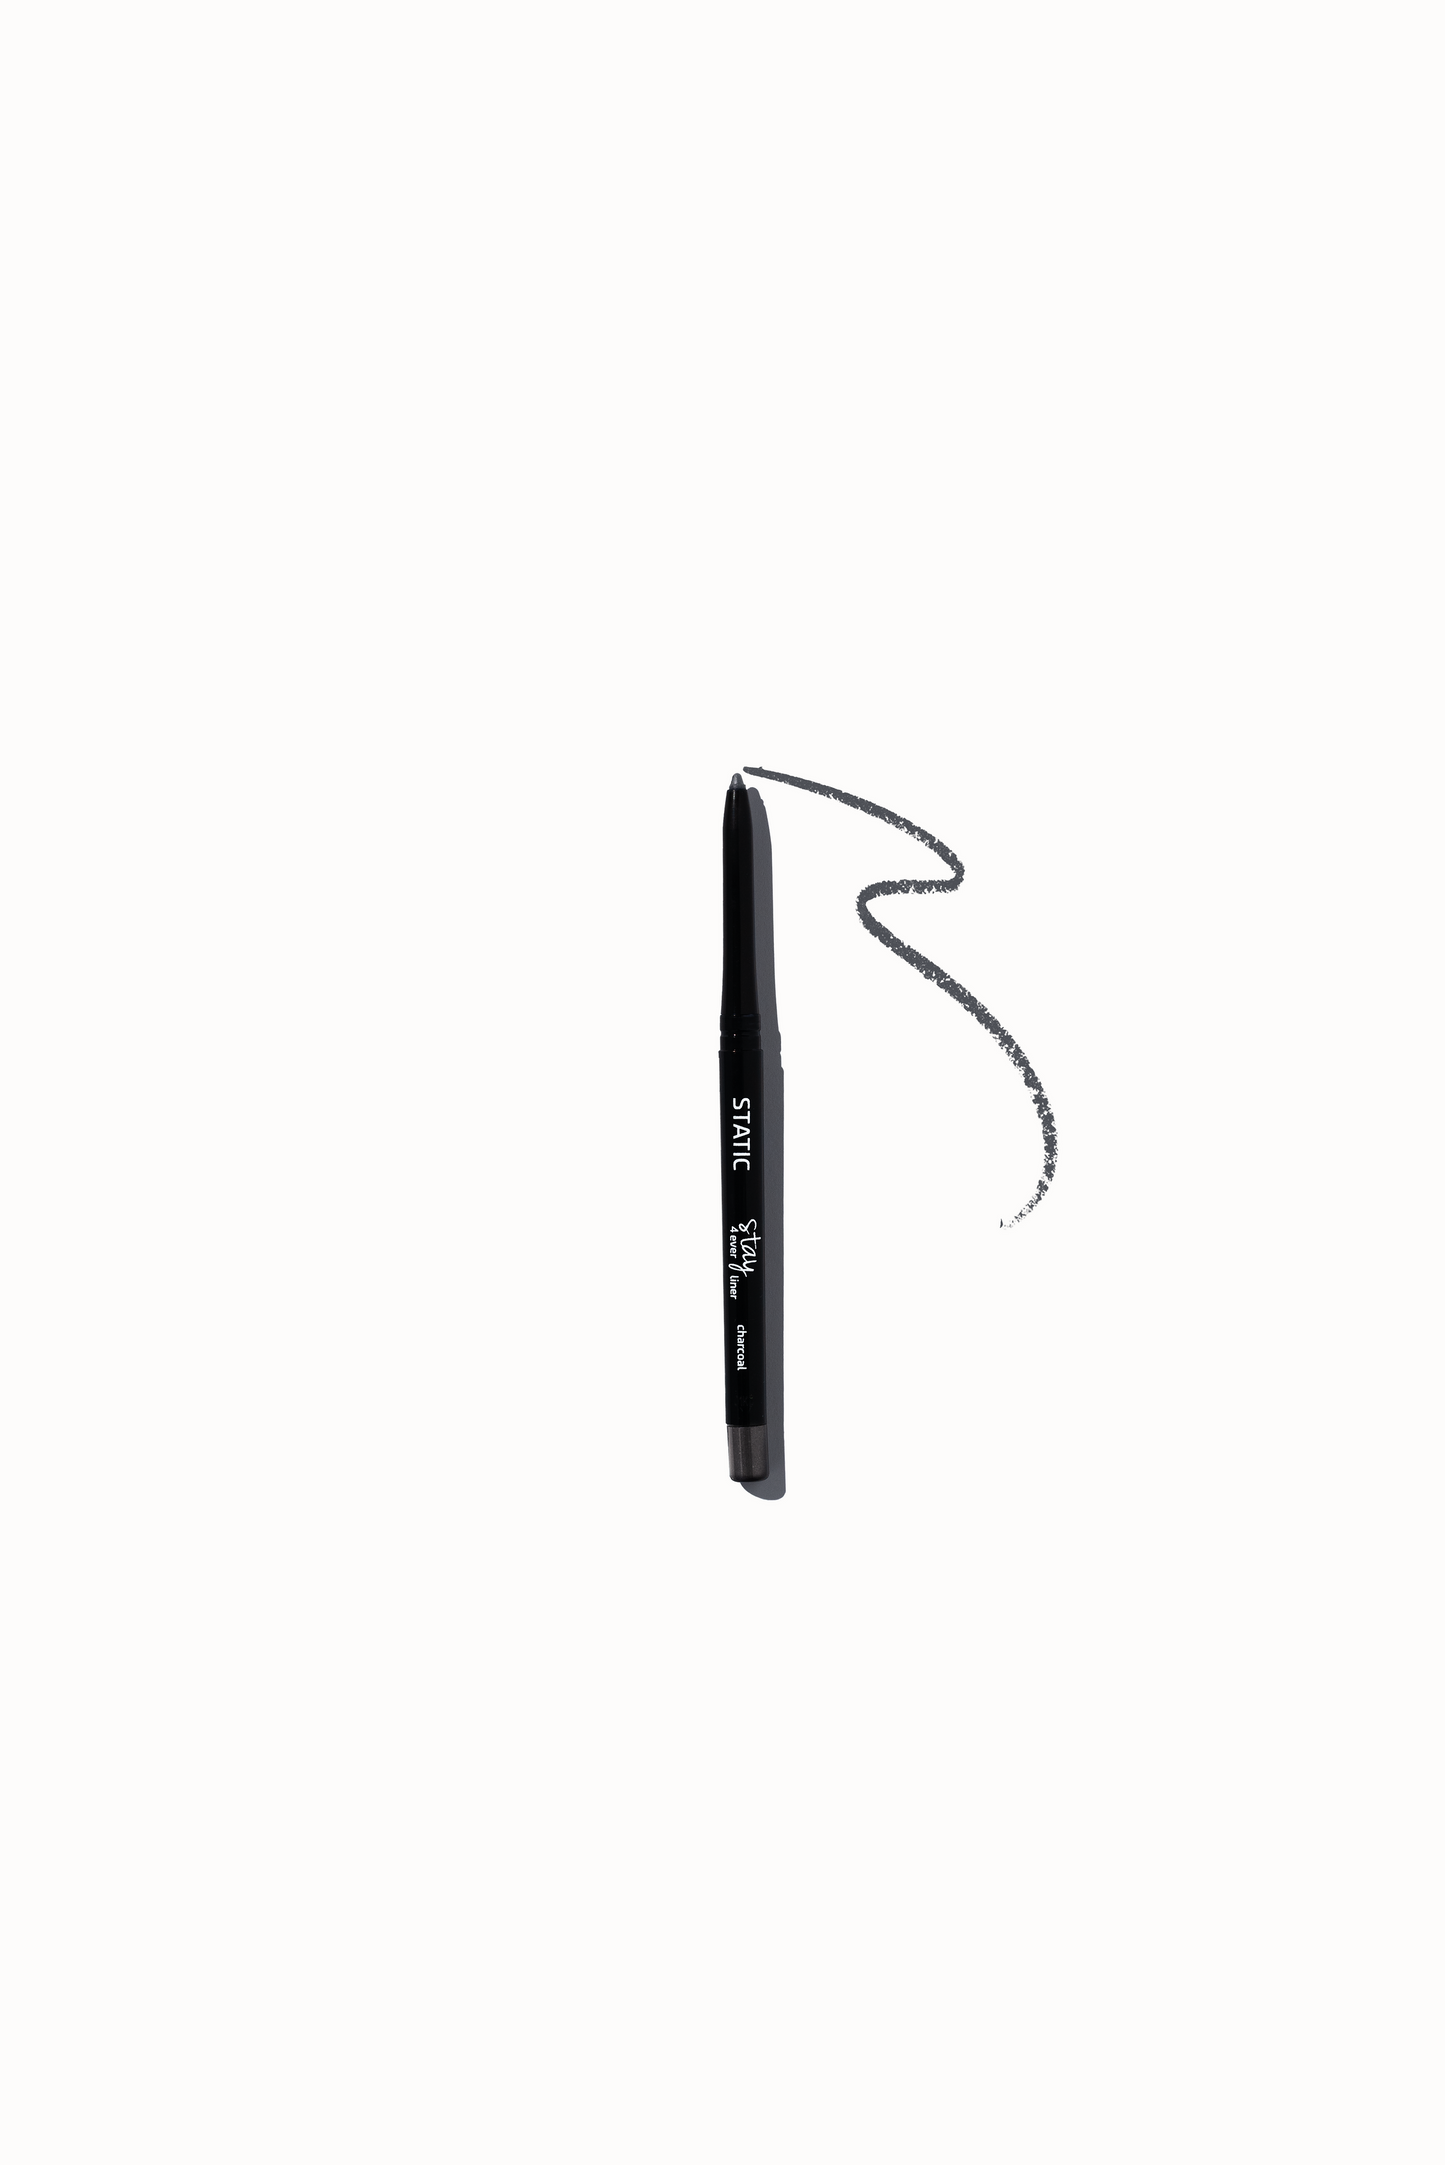 Stay 4 ever liner Charcoal